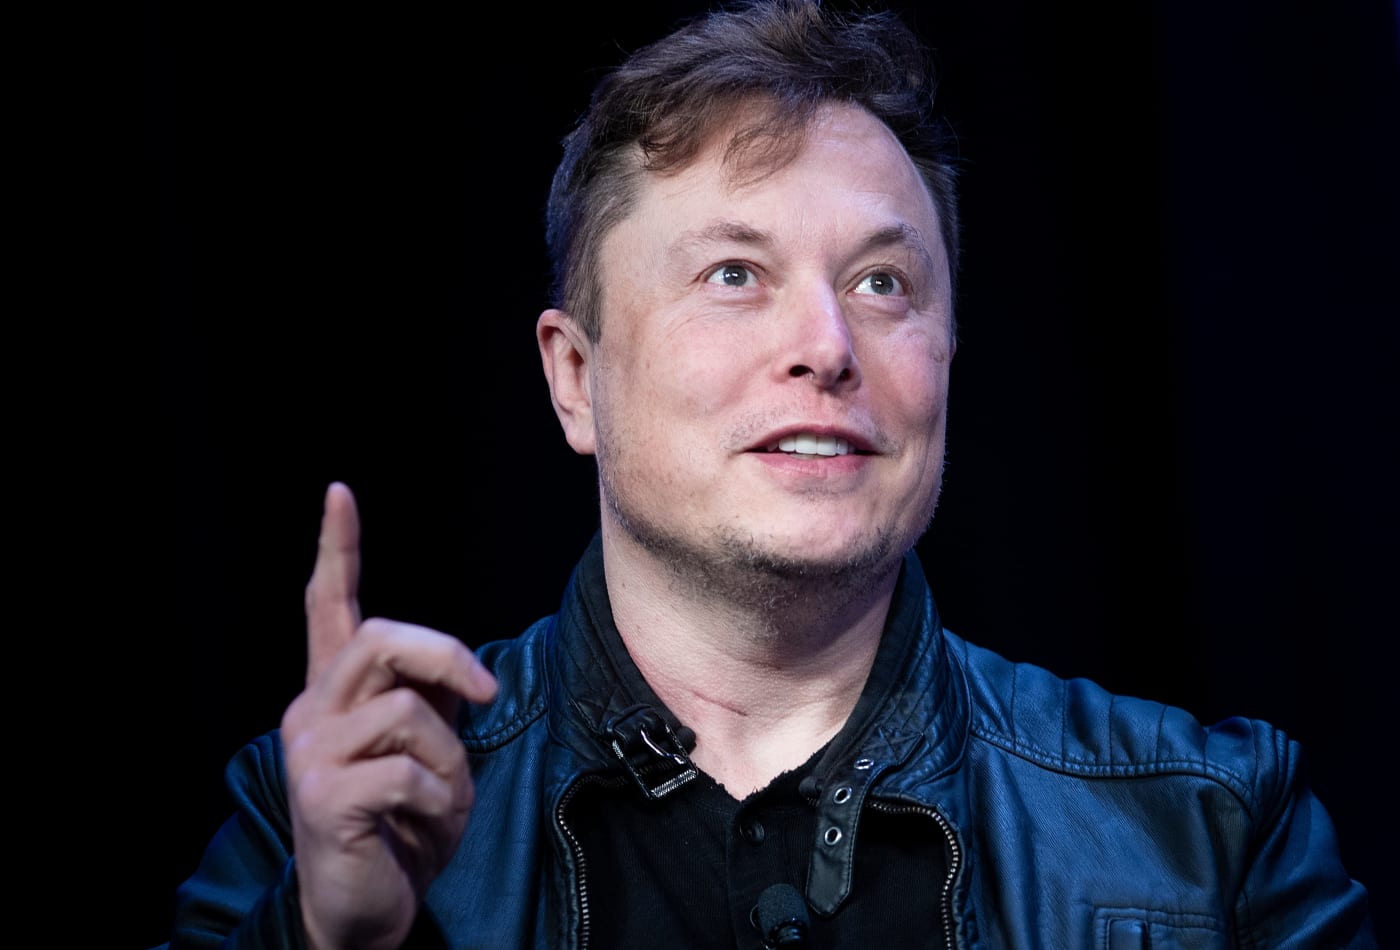 How Tesla and SpaceX CEO Elon Musk spends his billions